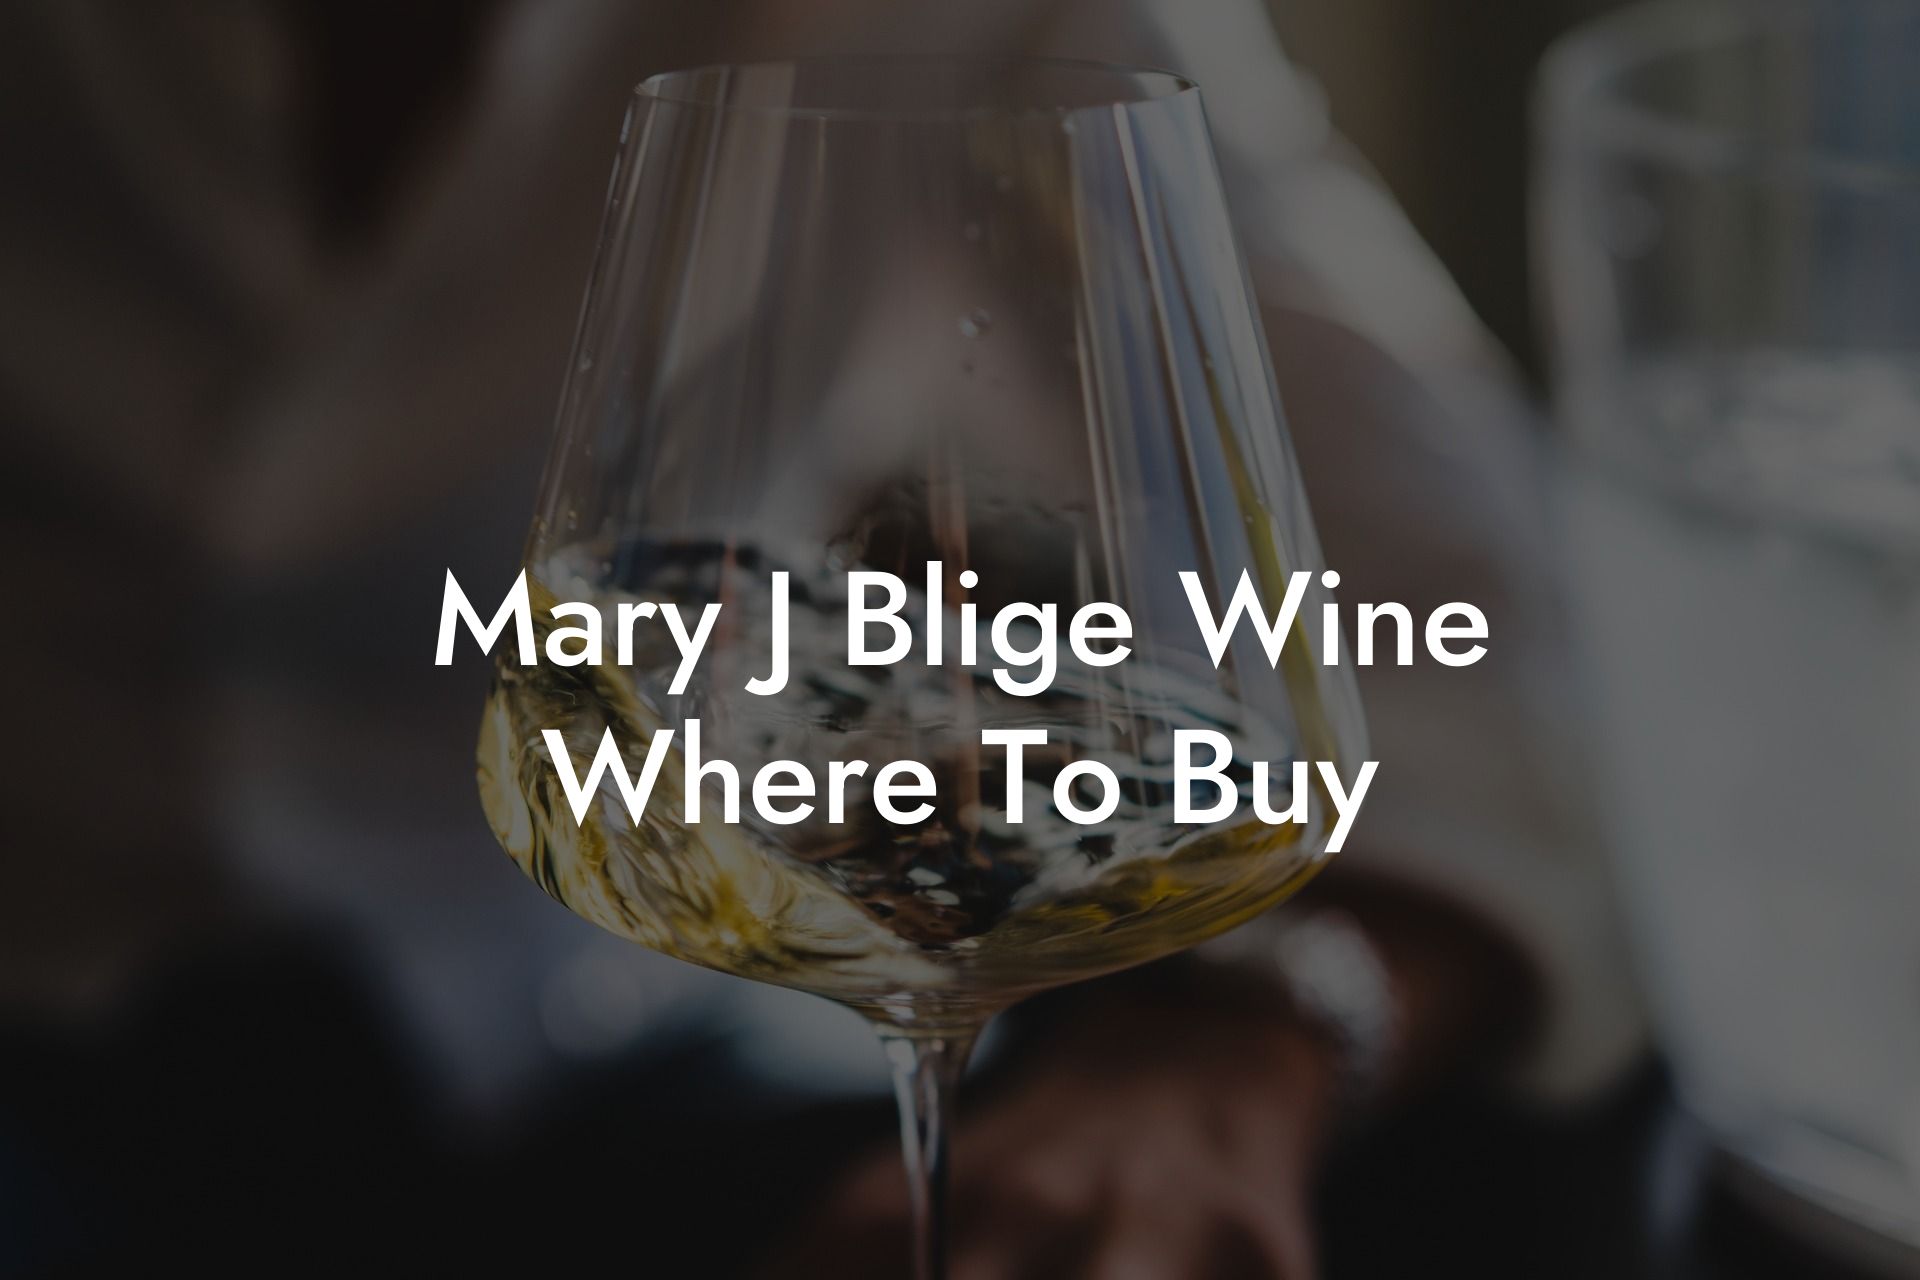 Mary J Blige Wine Where To Buy